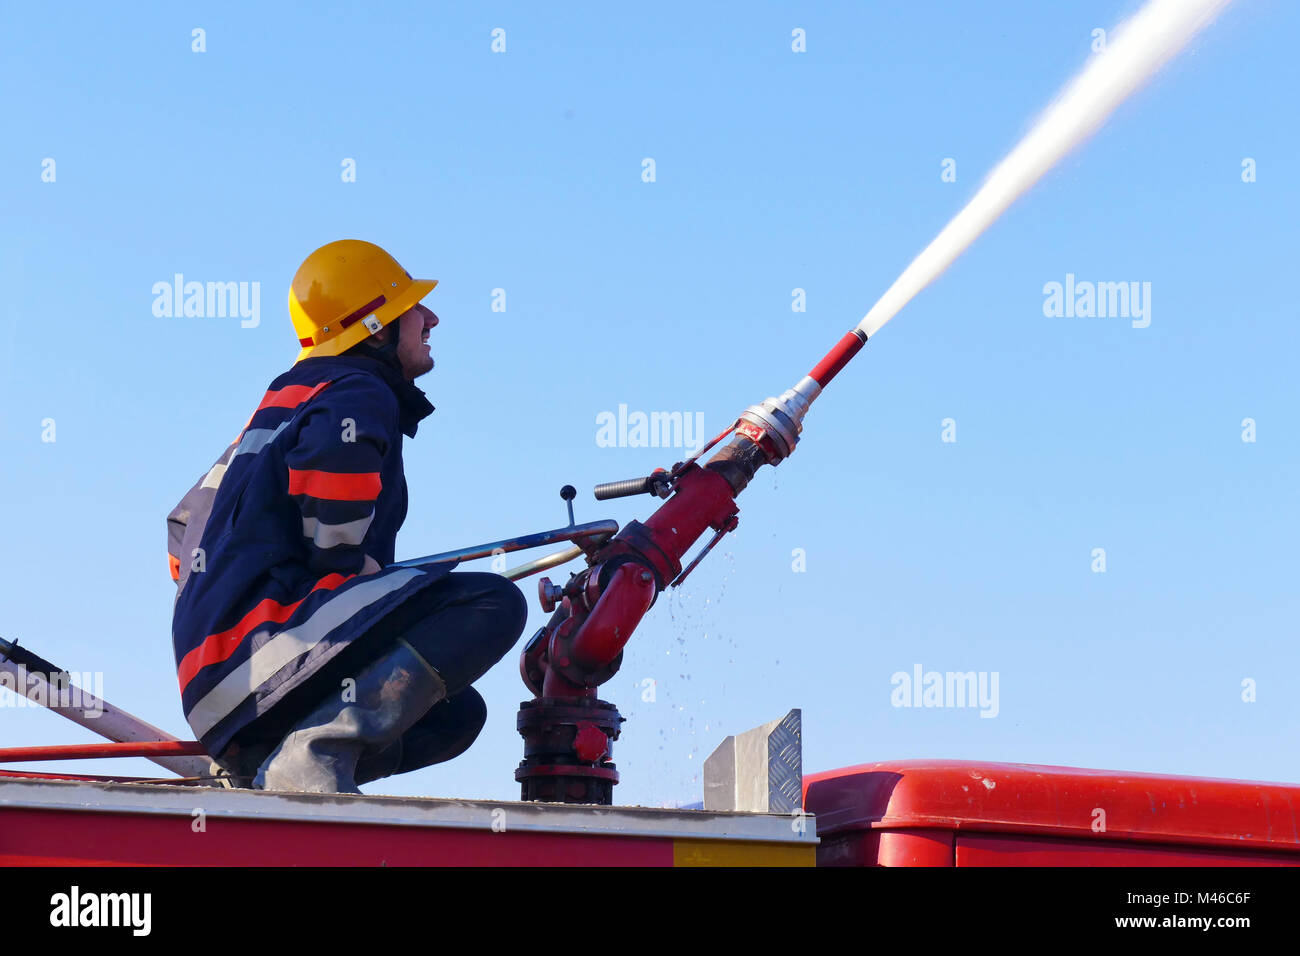 Fire fighting with water cannon Stock Photo